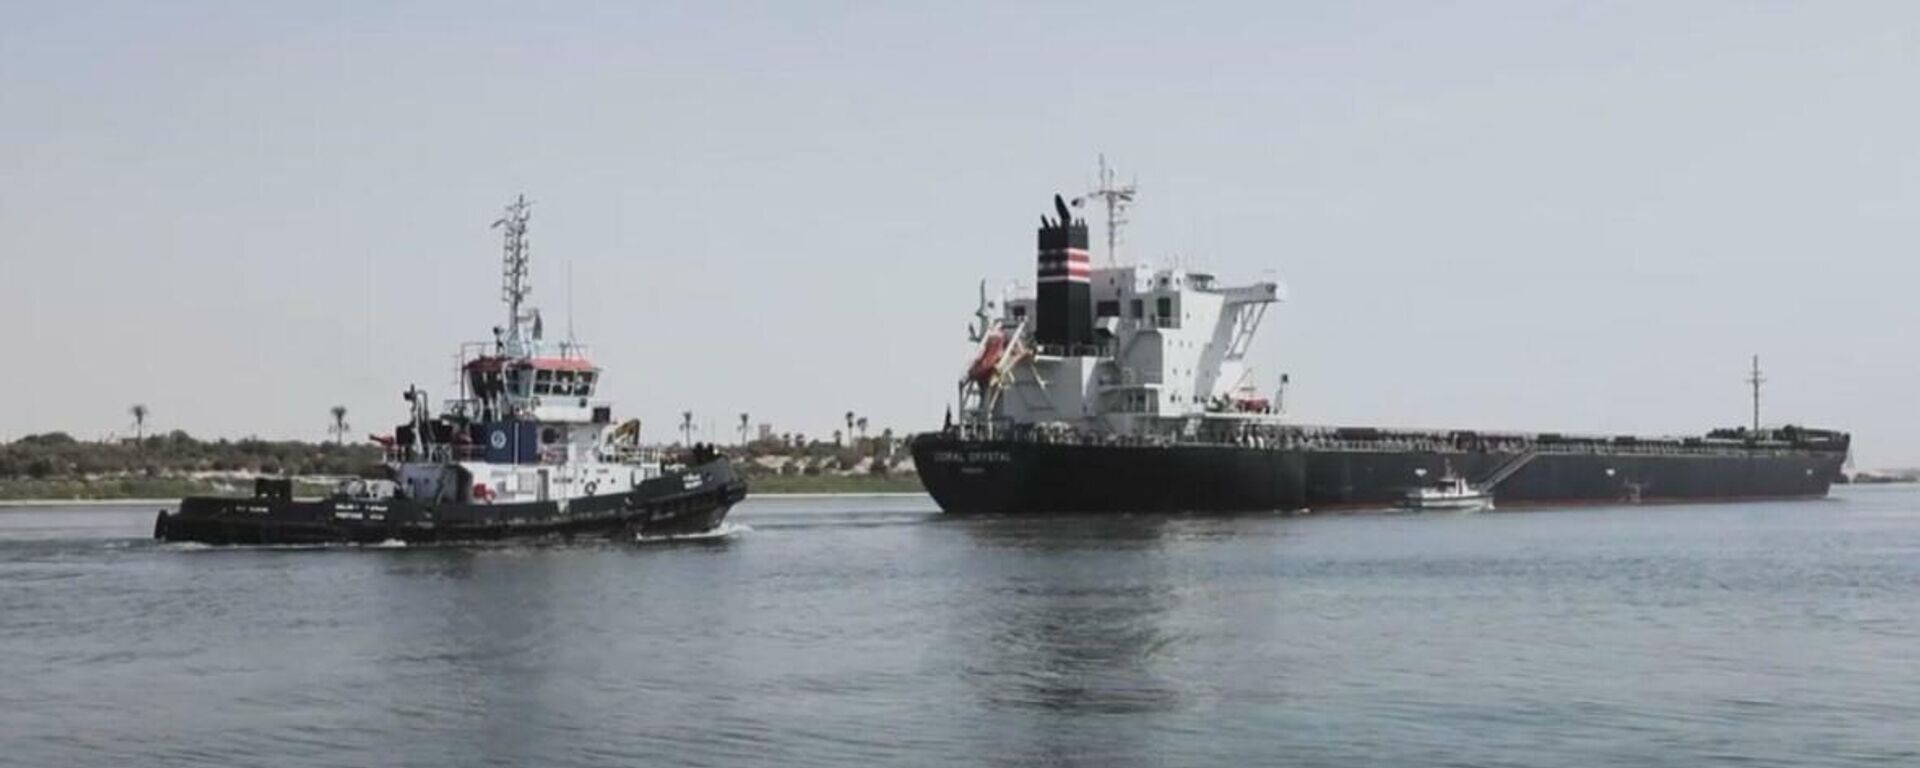 Egypt: Ship resumes trip after briefly getting stuck in Suez canal - Sputnik Молдова, 1920, 10.09.2021